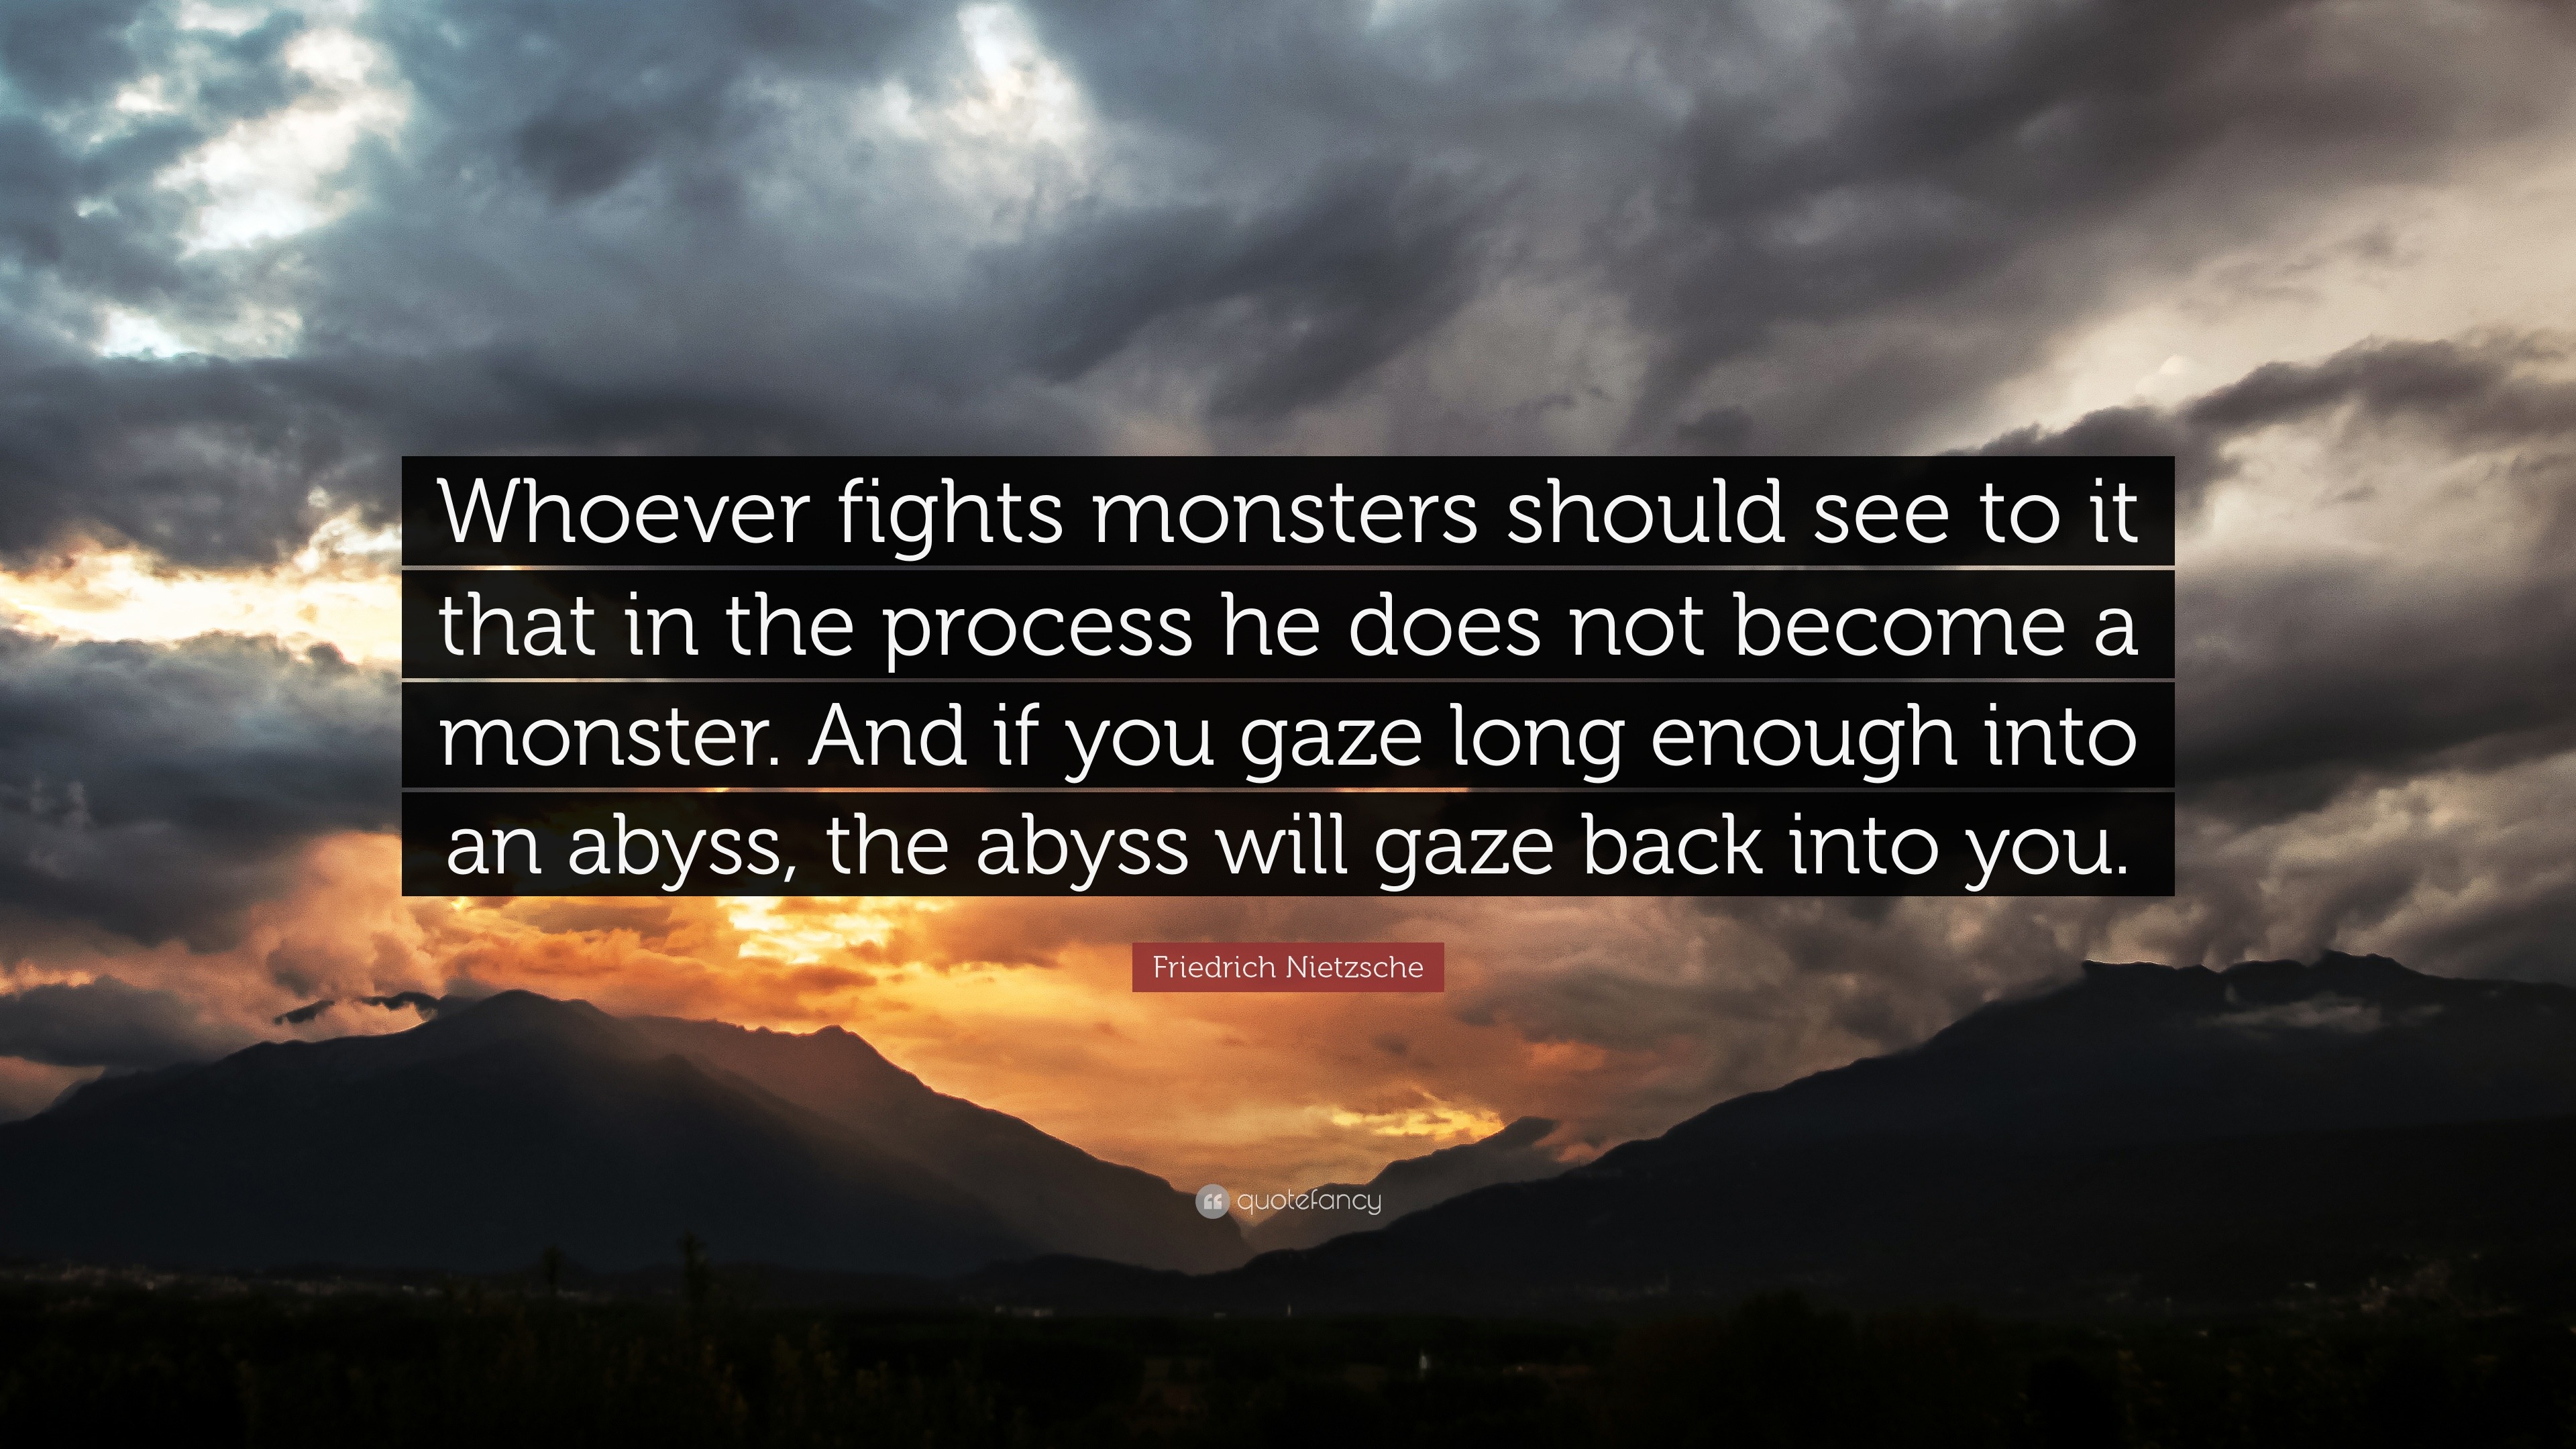 9862-Friedrich-Nietzsche-Quote-Whoever-fights-monsters-should-see-to-it.jpg